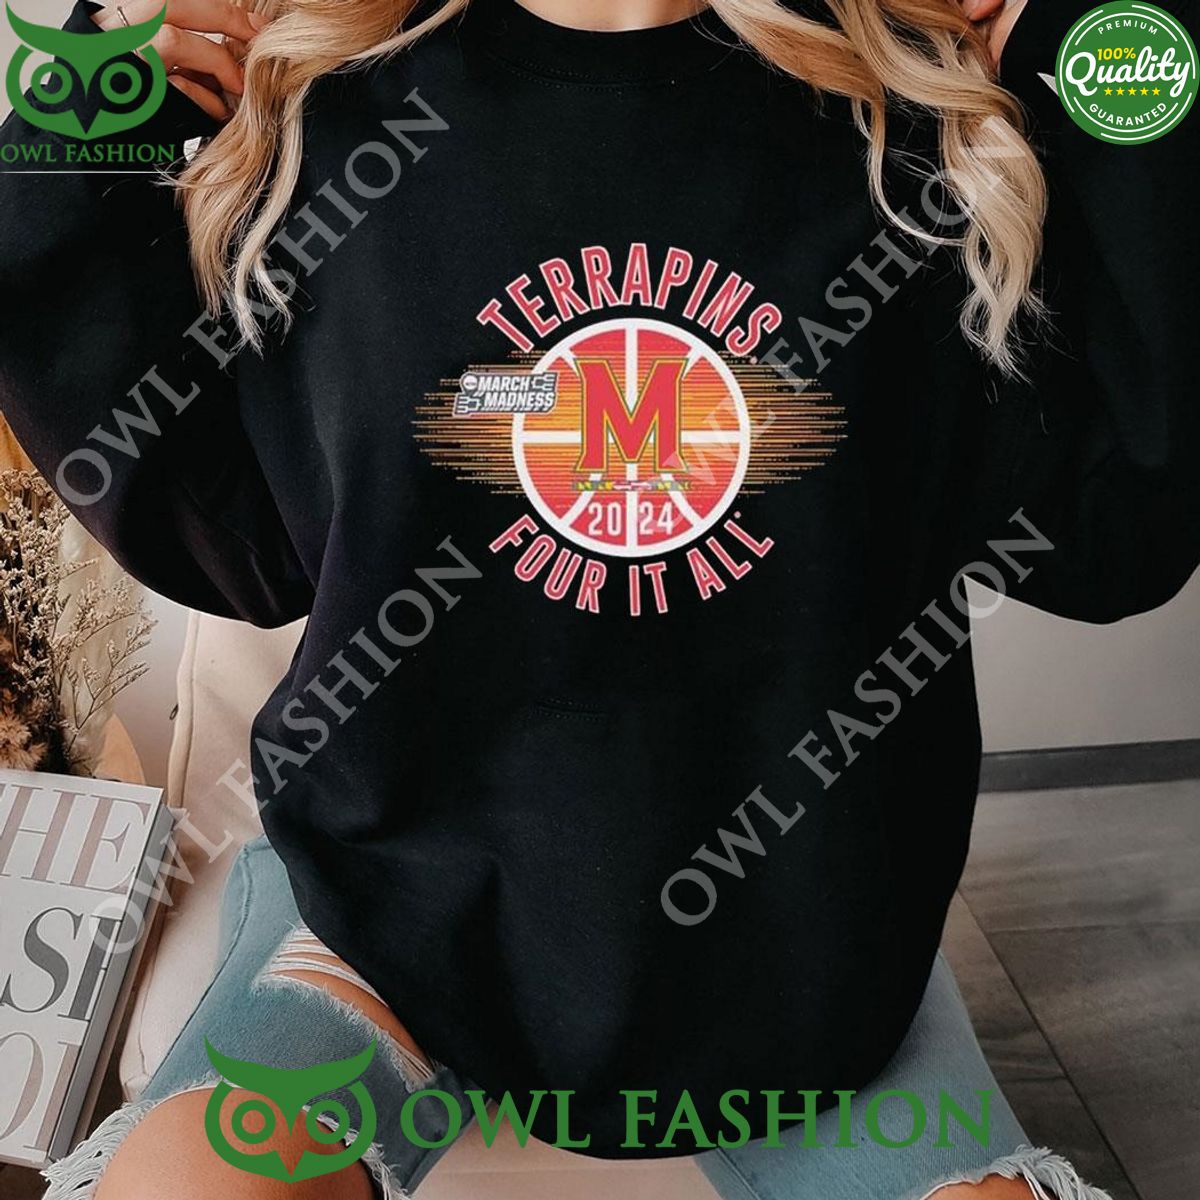 trending 2024 march madness terrapins four it all shirt sweater hoodie 1 YV9Uh.jpg